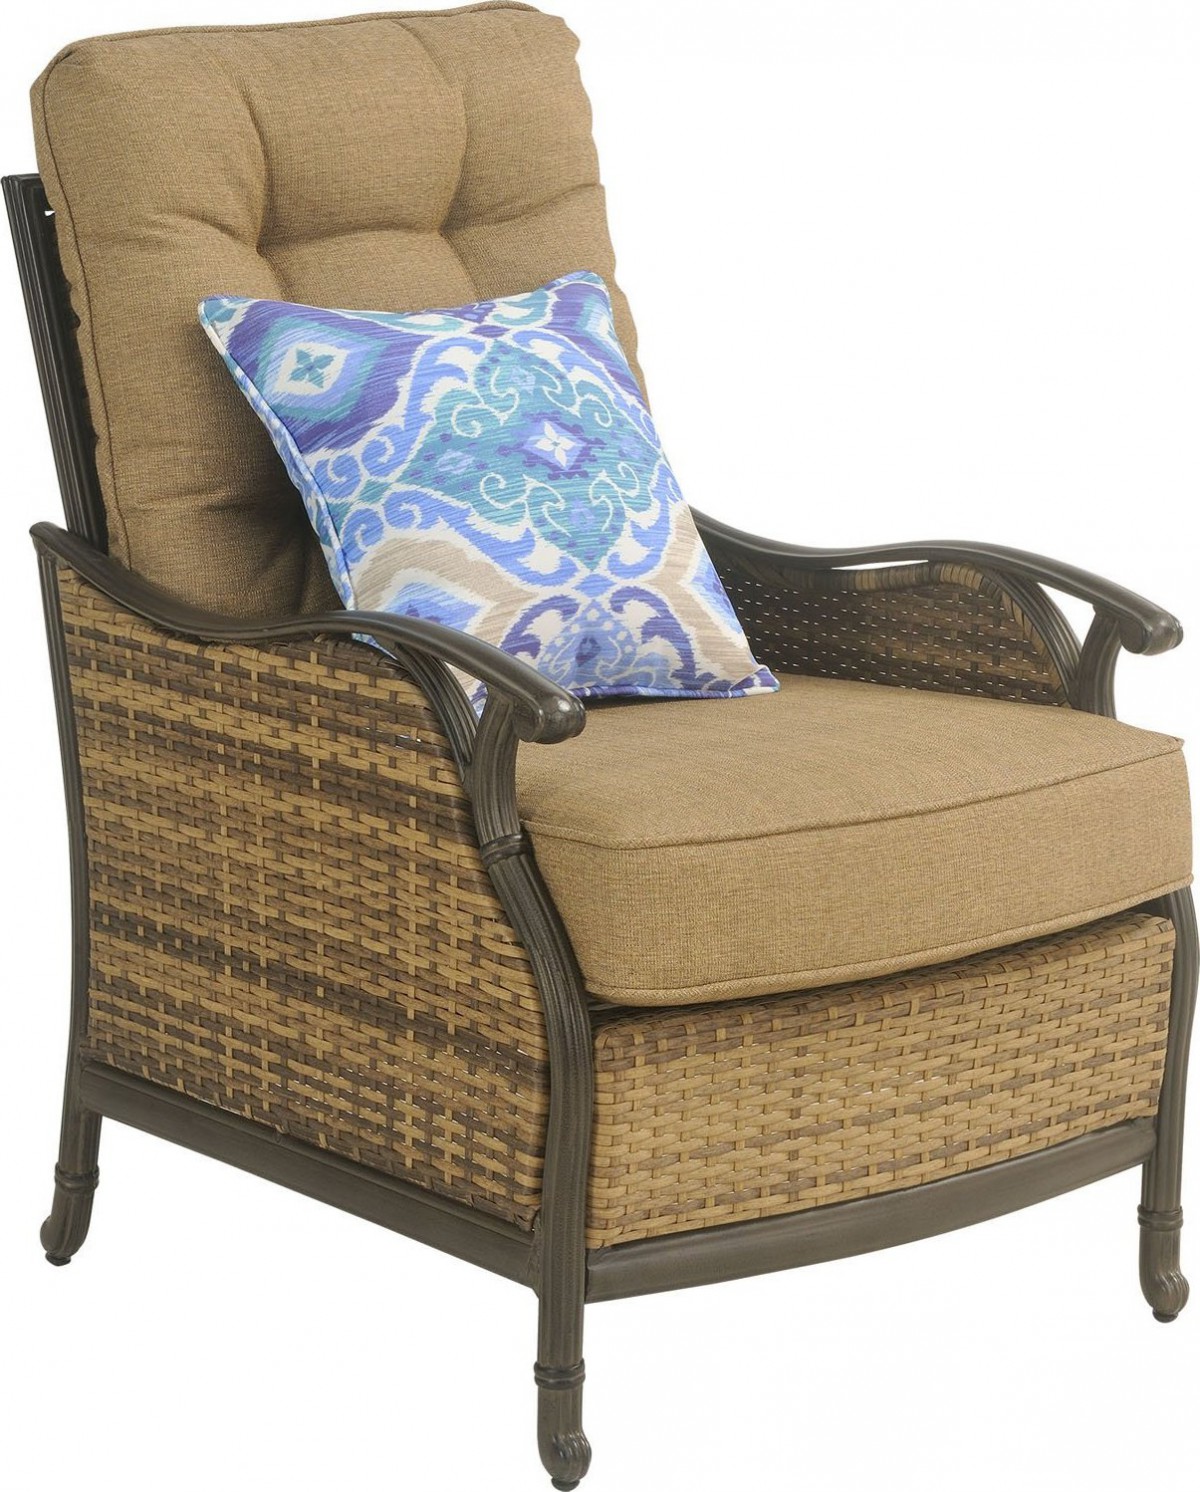 Hanover Hudson Square 4-Piece Outdoor Deep-Seating Lounge Set